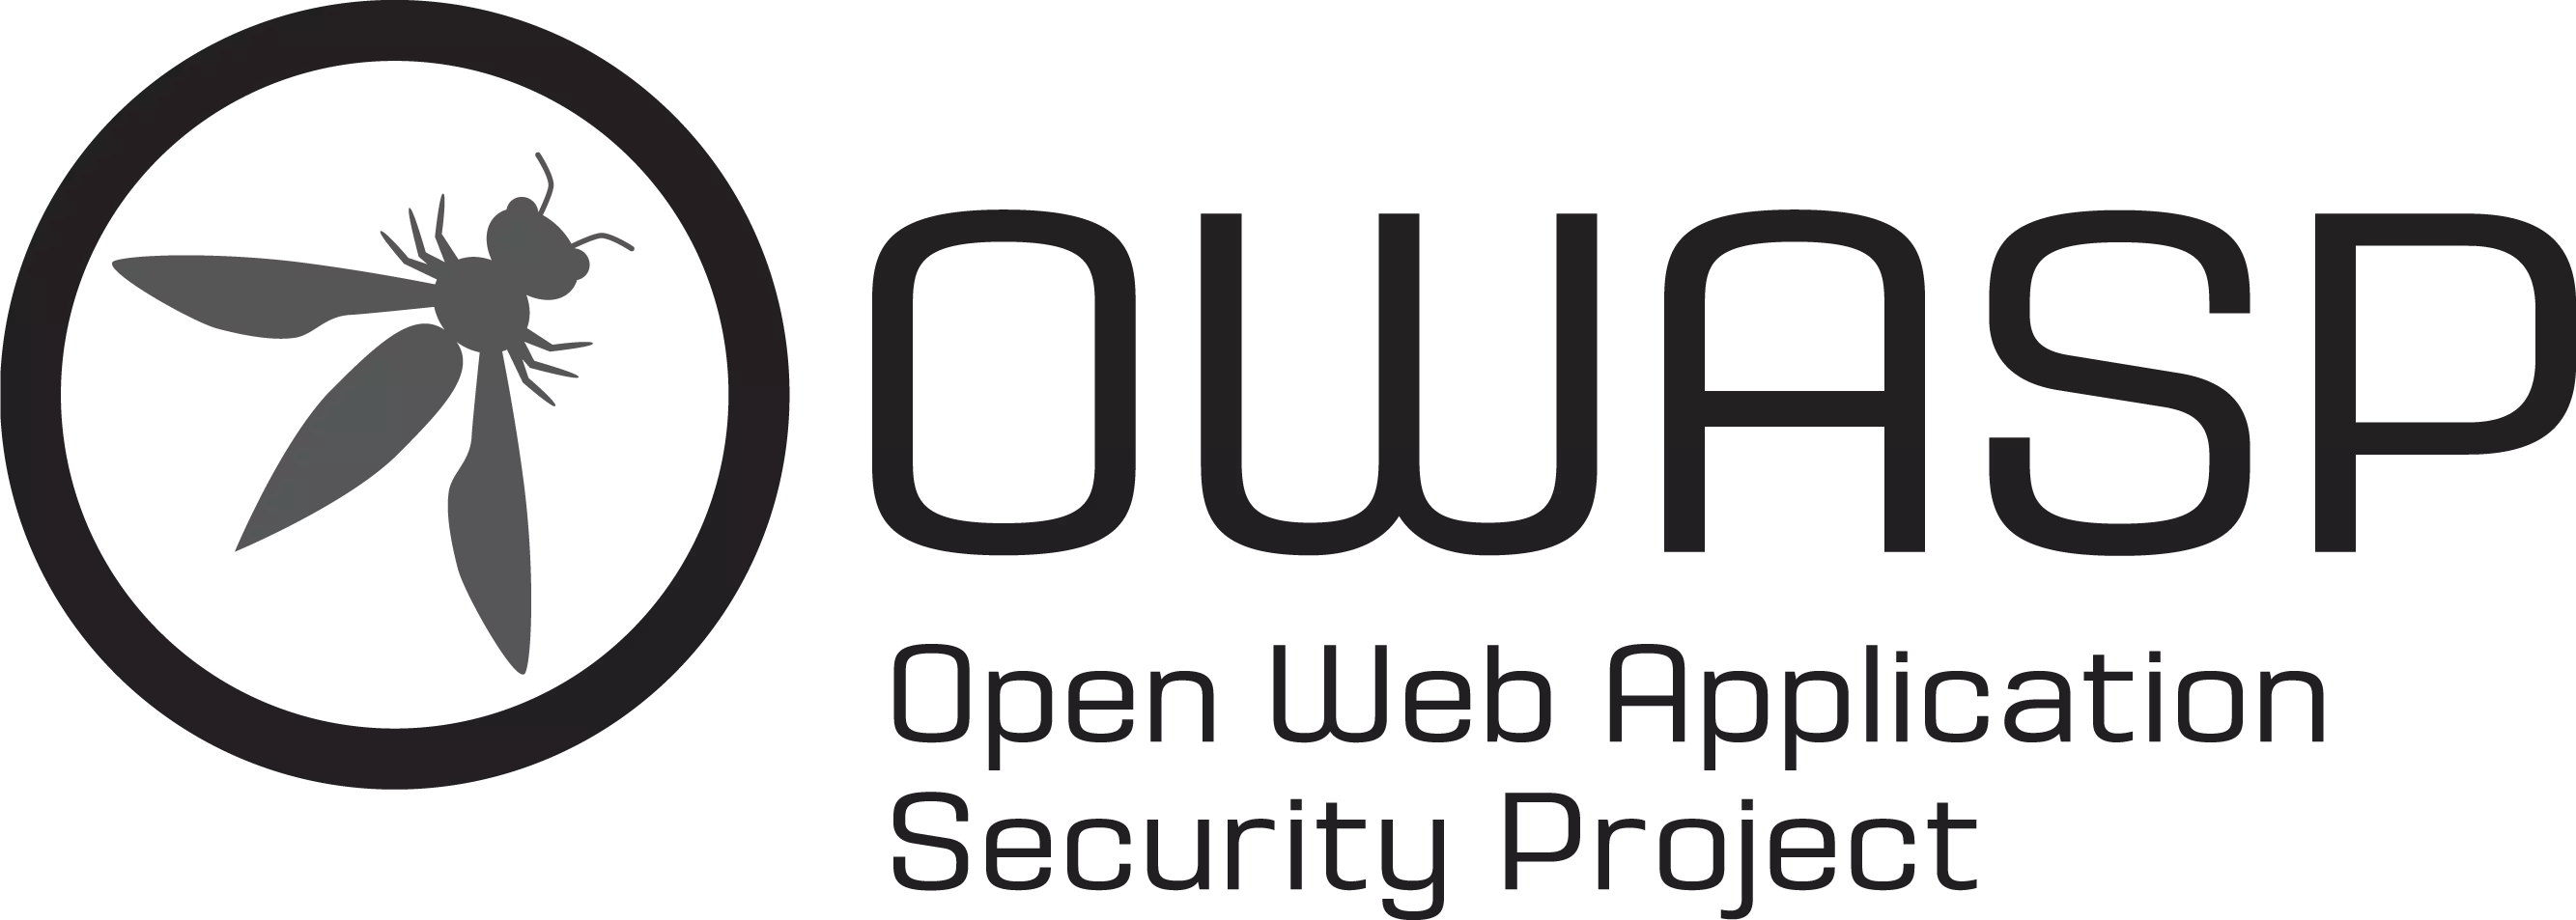 Supporting the new 2017 Update to the OWASP Top 10